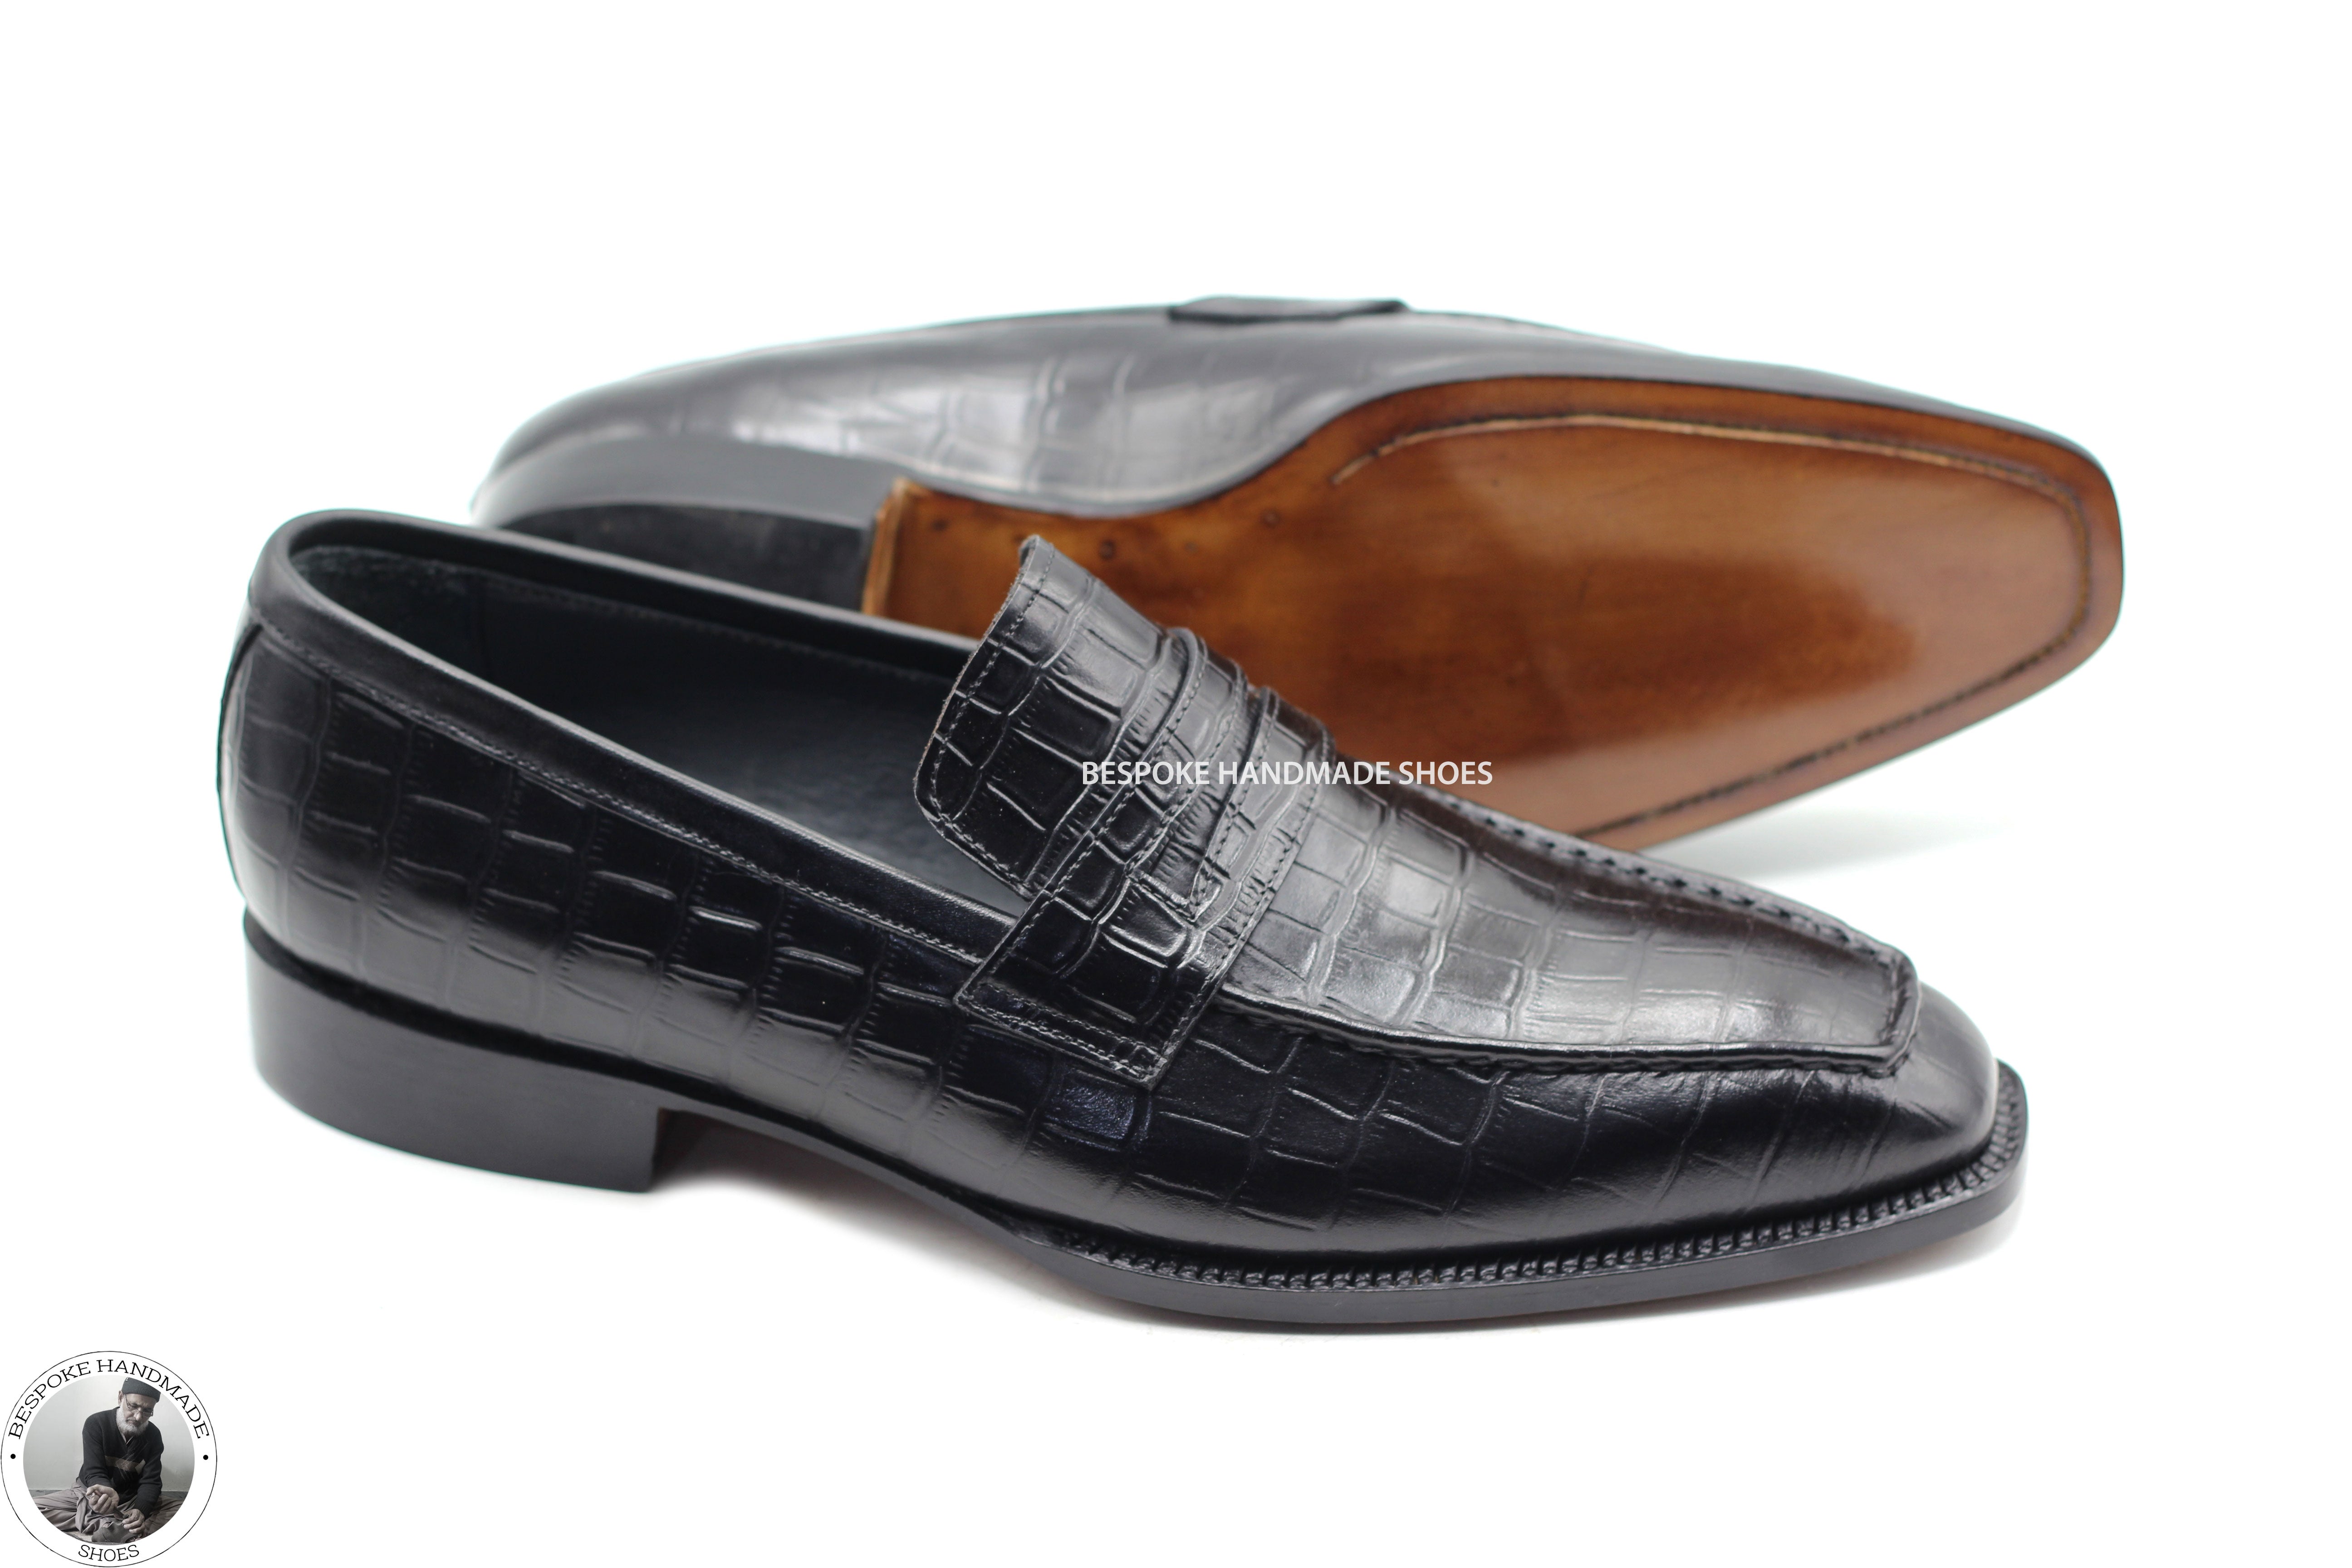 Handcrafted Pure Calf Black Alligator Leather Loafers Style Slip On Moccasin Fashion Shoes For Men's